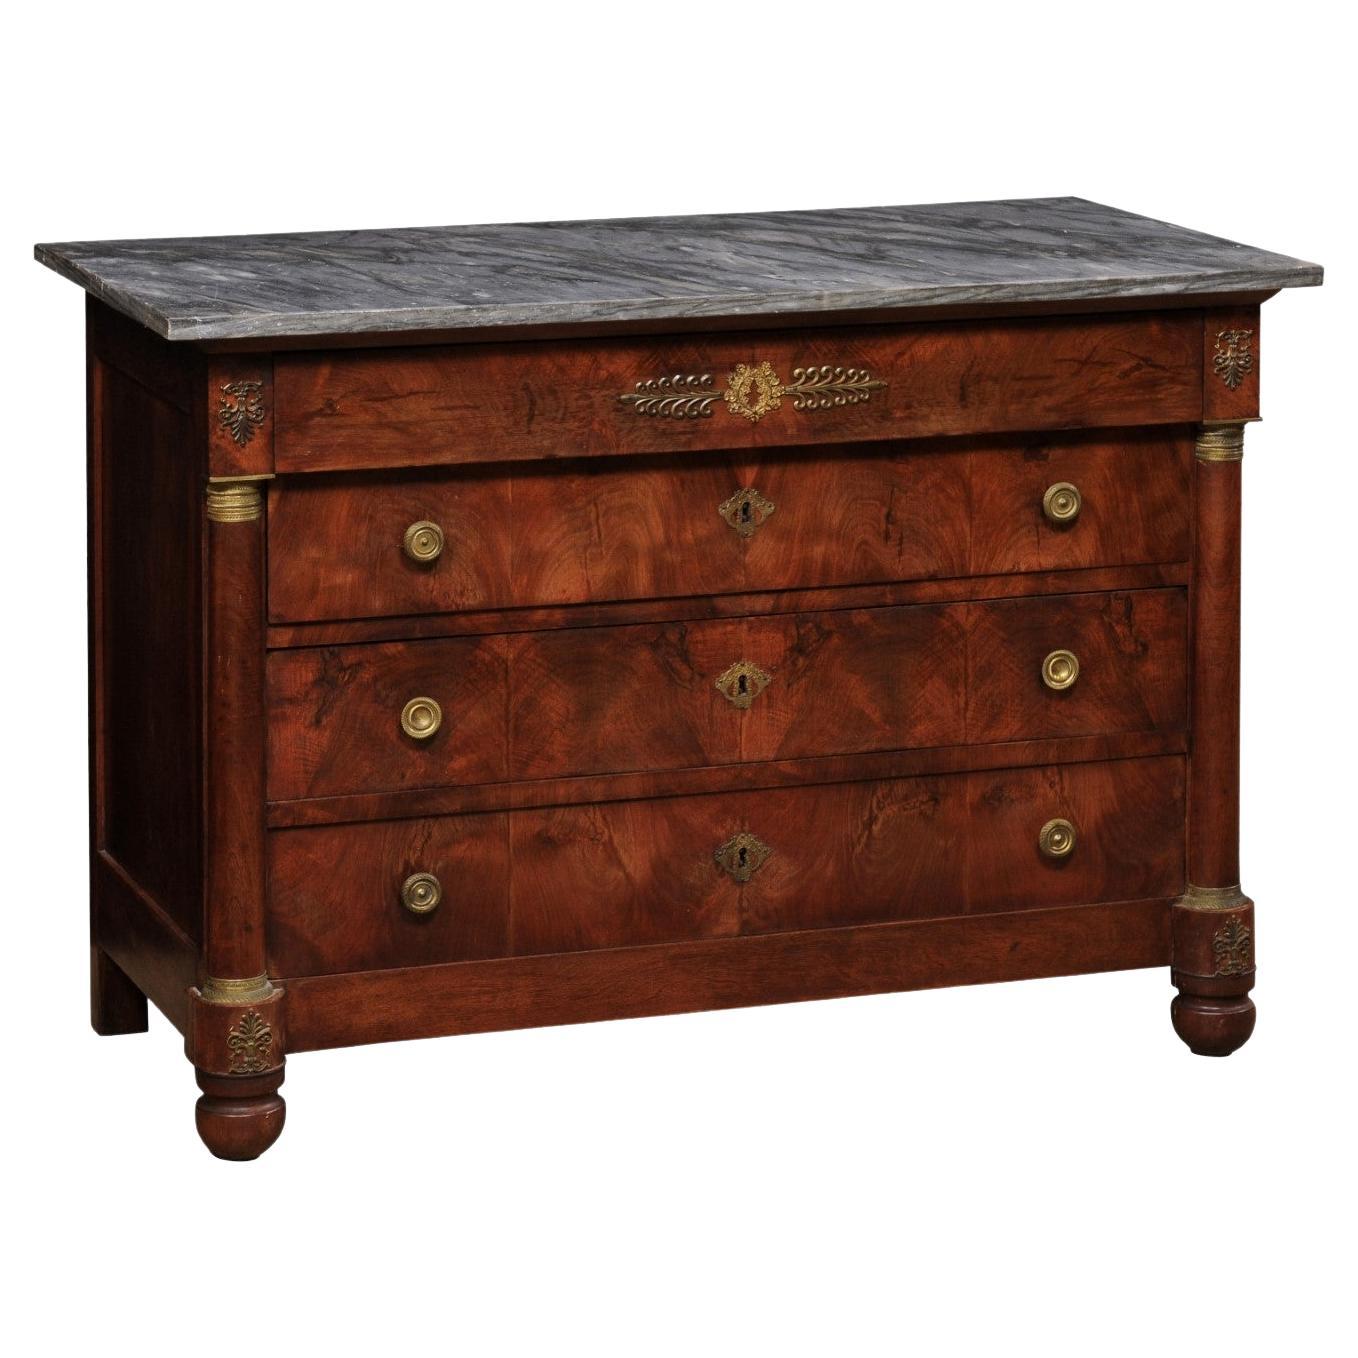 19th Century Neoclassical French Marble-Top Commode W/Exquisite Brass Accents